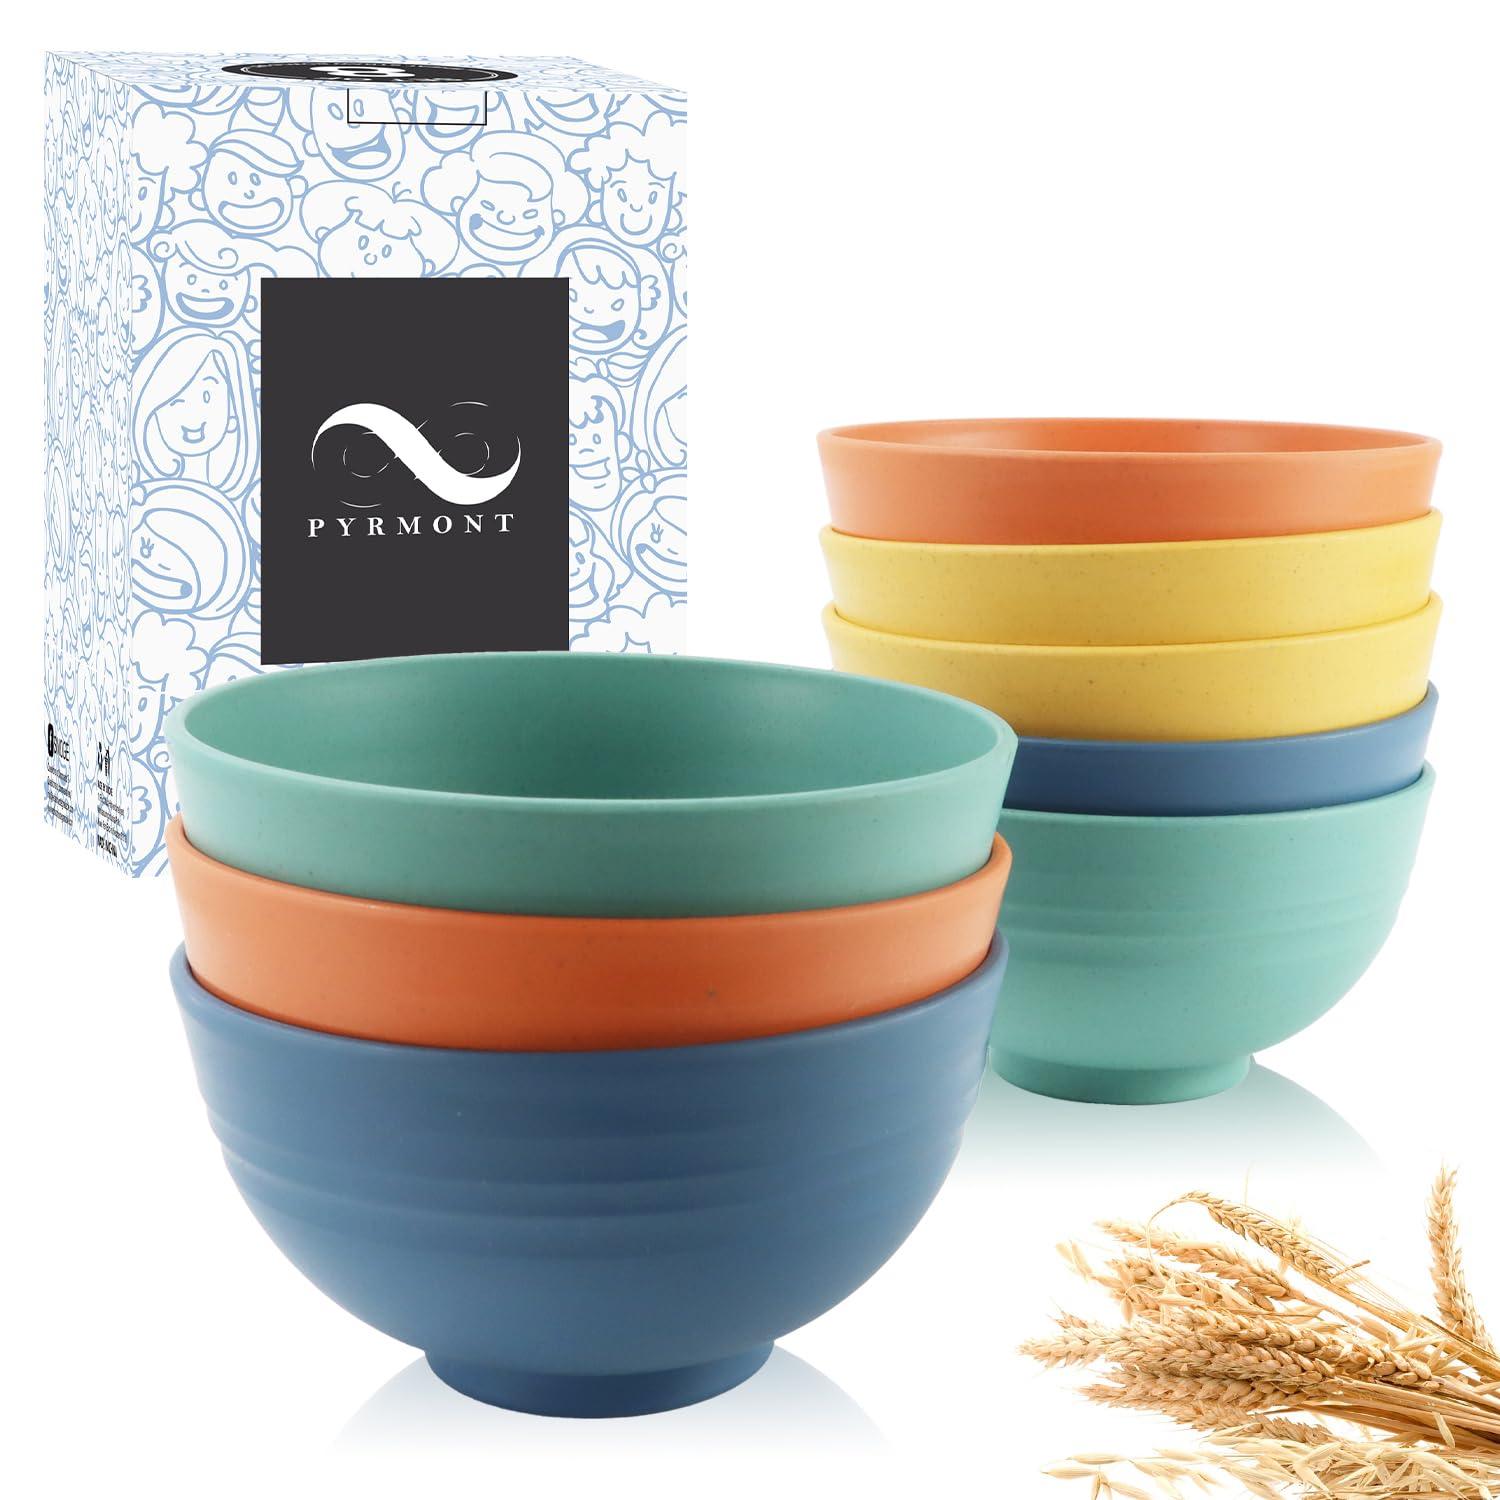 PYRMONT,Wheat Straw Bowls Set of 8,10 OZ Small Bowls,Kids Bowls,Cereal Bowls,Plastic Bowls Reusable,Unbreakable Ice Cream Bowls for Dessert,Snack,BPA-Free,Dishwasher & Microwave Safe Bowls for Kitchen - CookCave